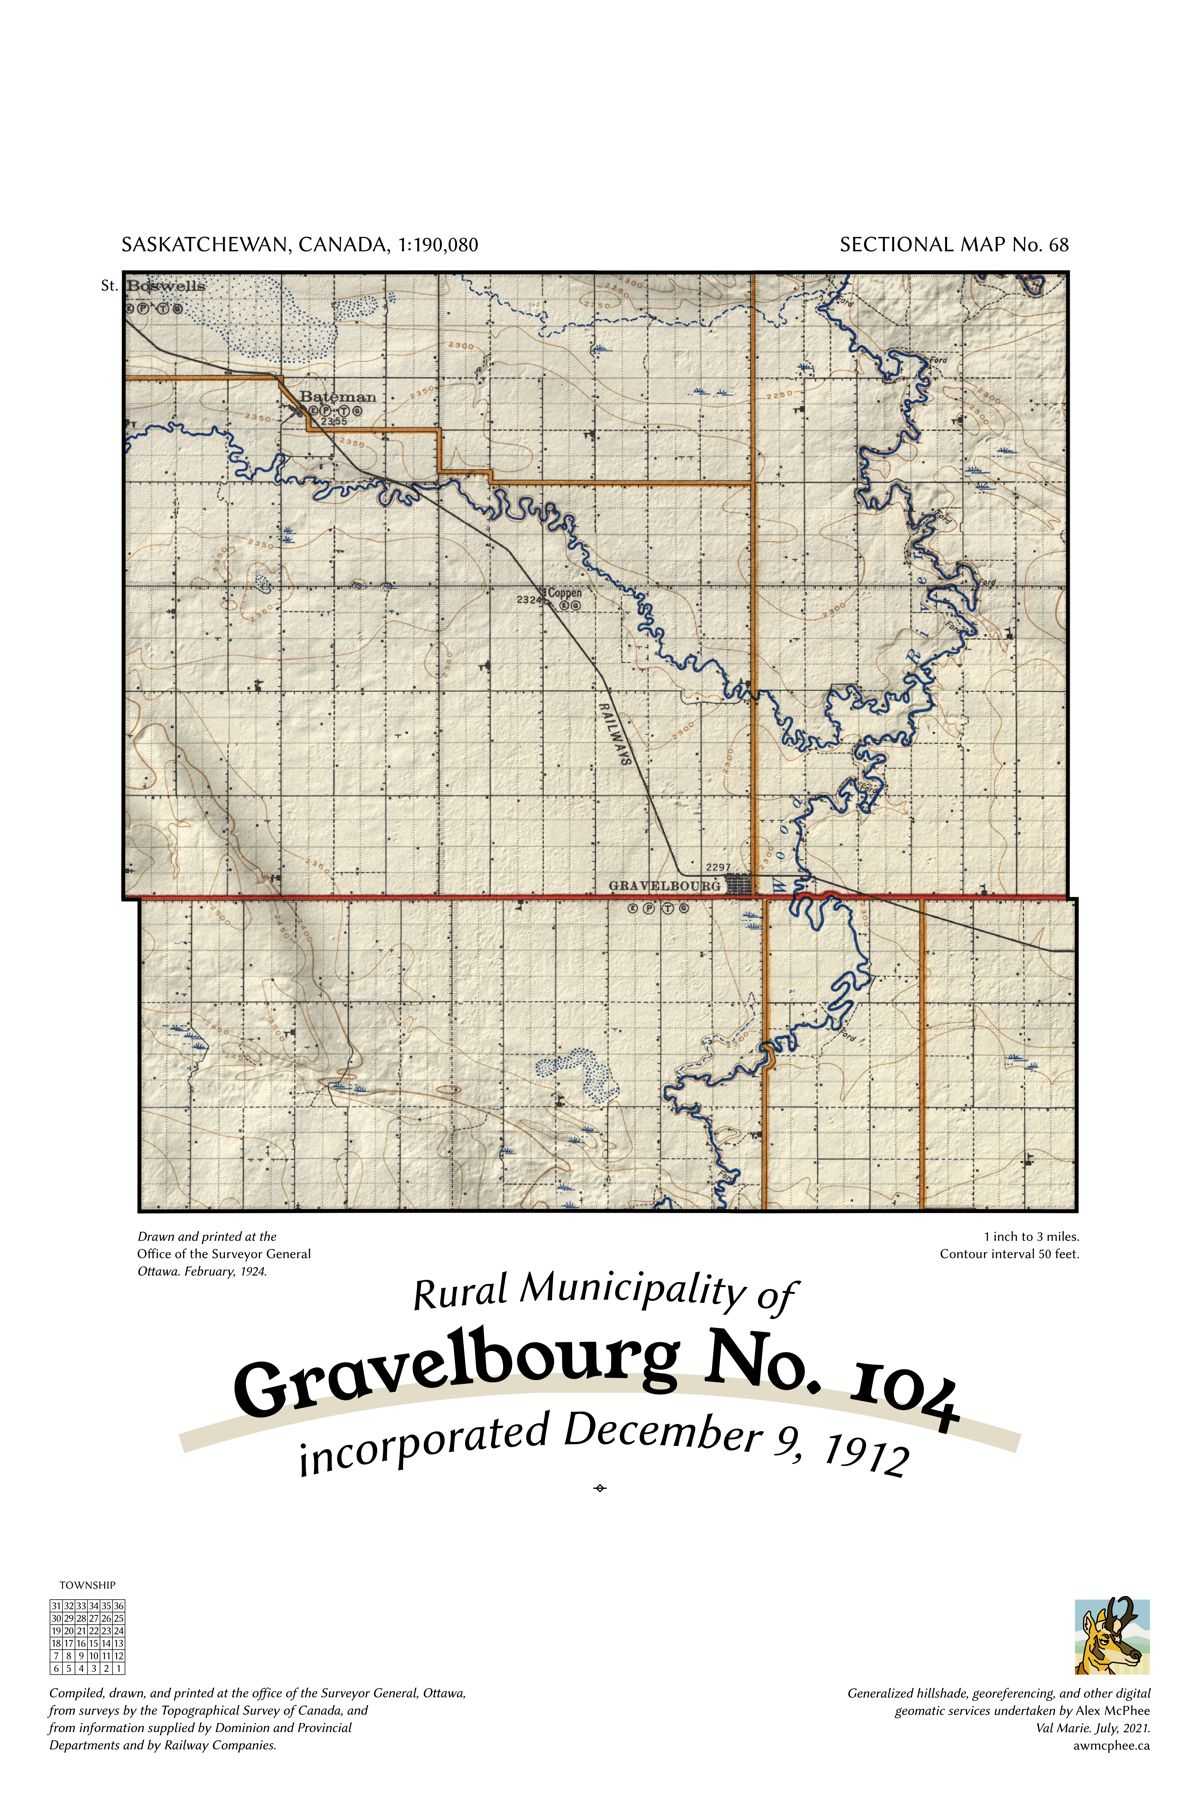 A map of the Rural Municipality of Gravelbourg No. 104.